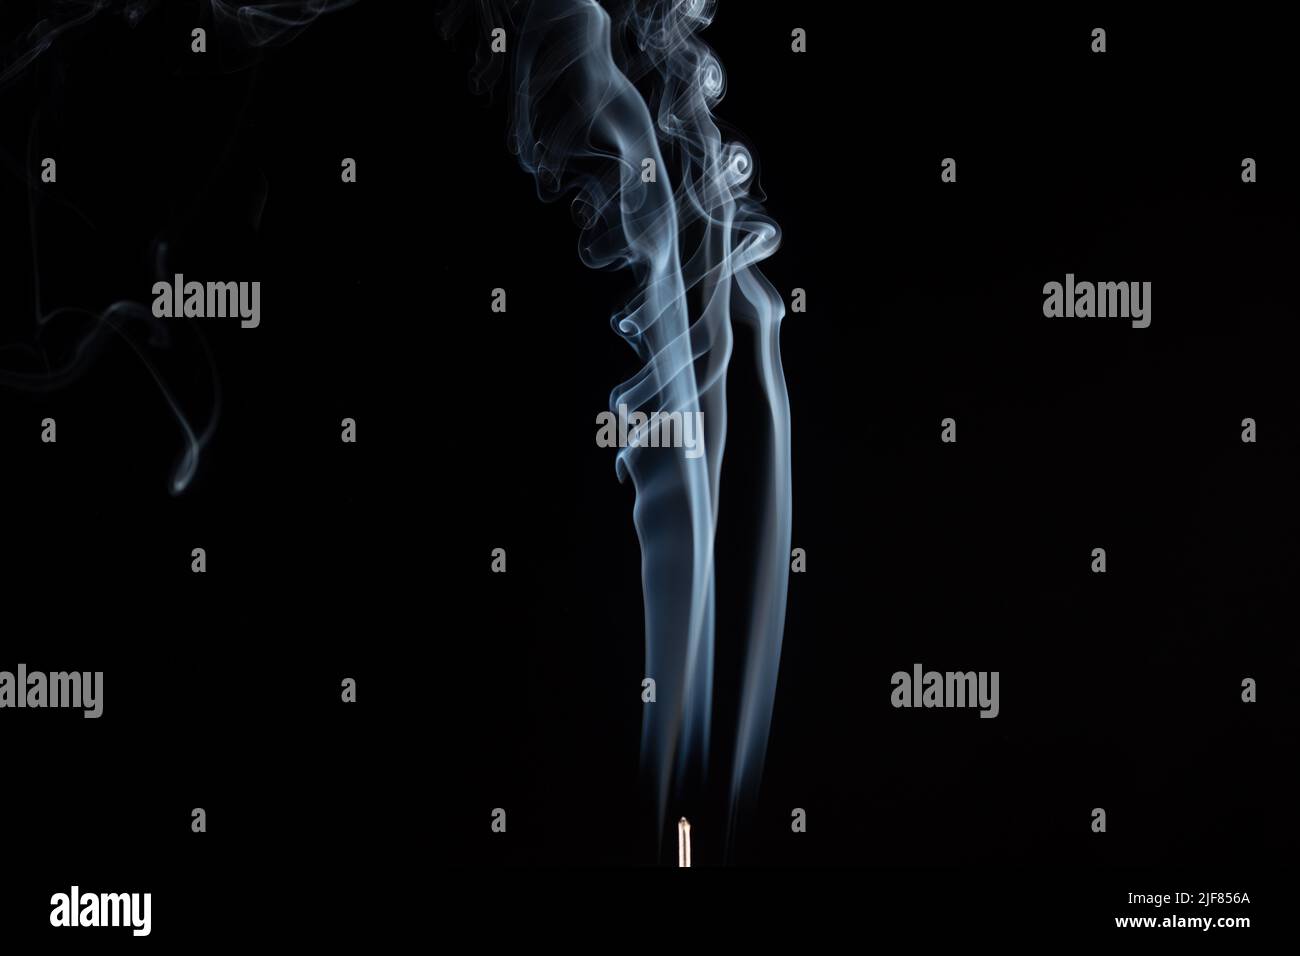 incense stick with smoke against black background Stock Photo